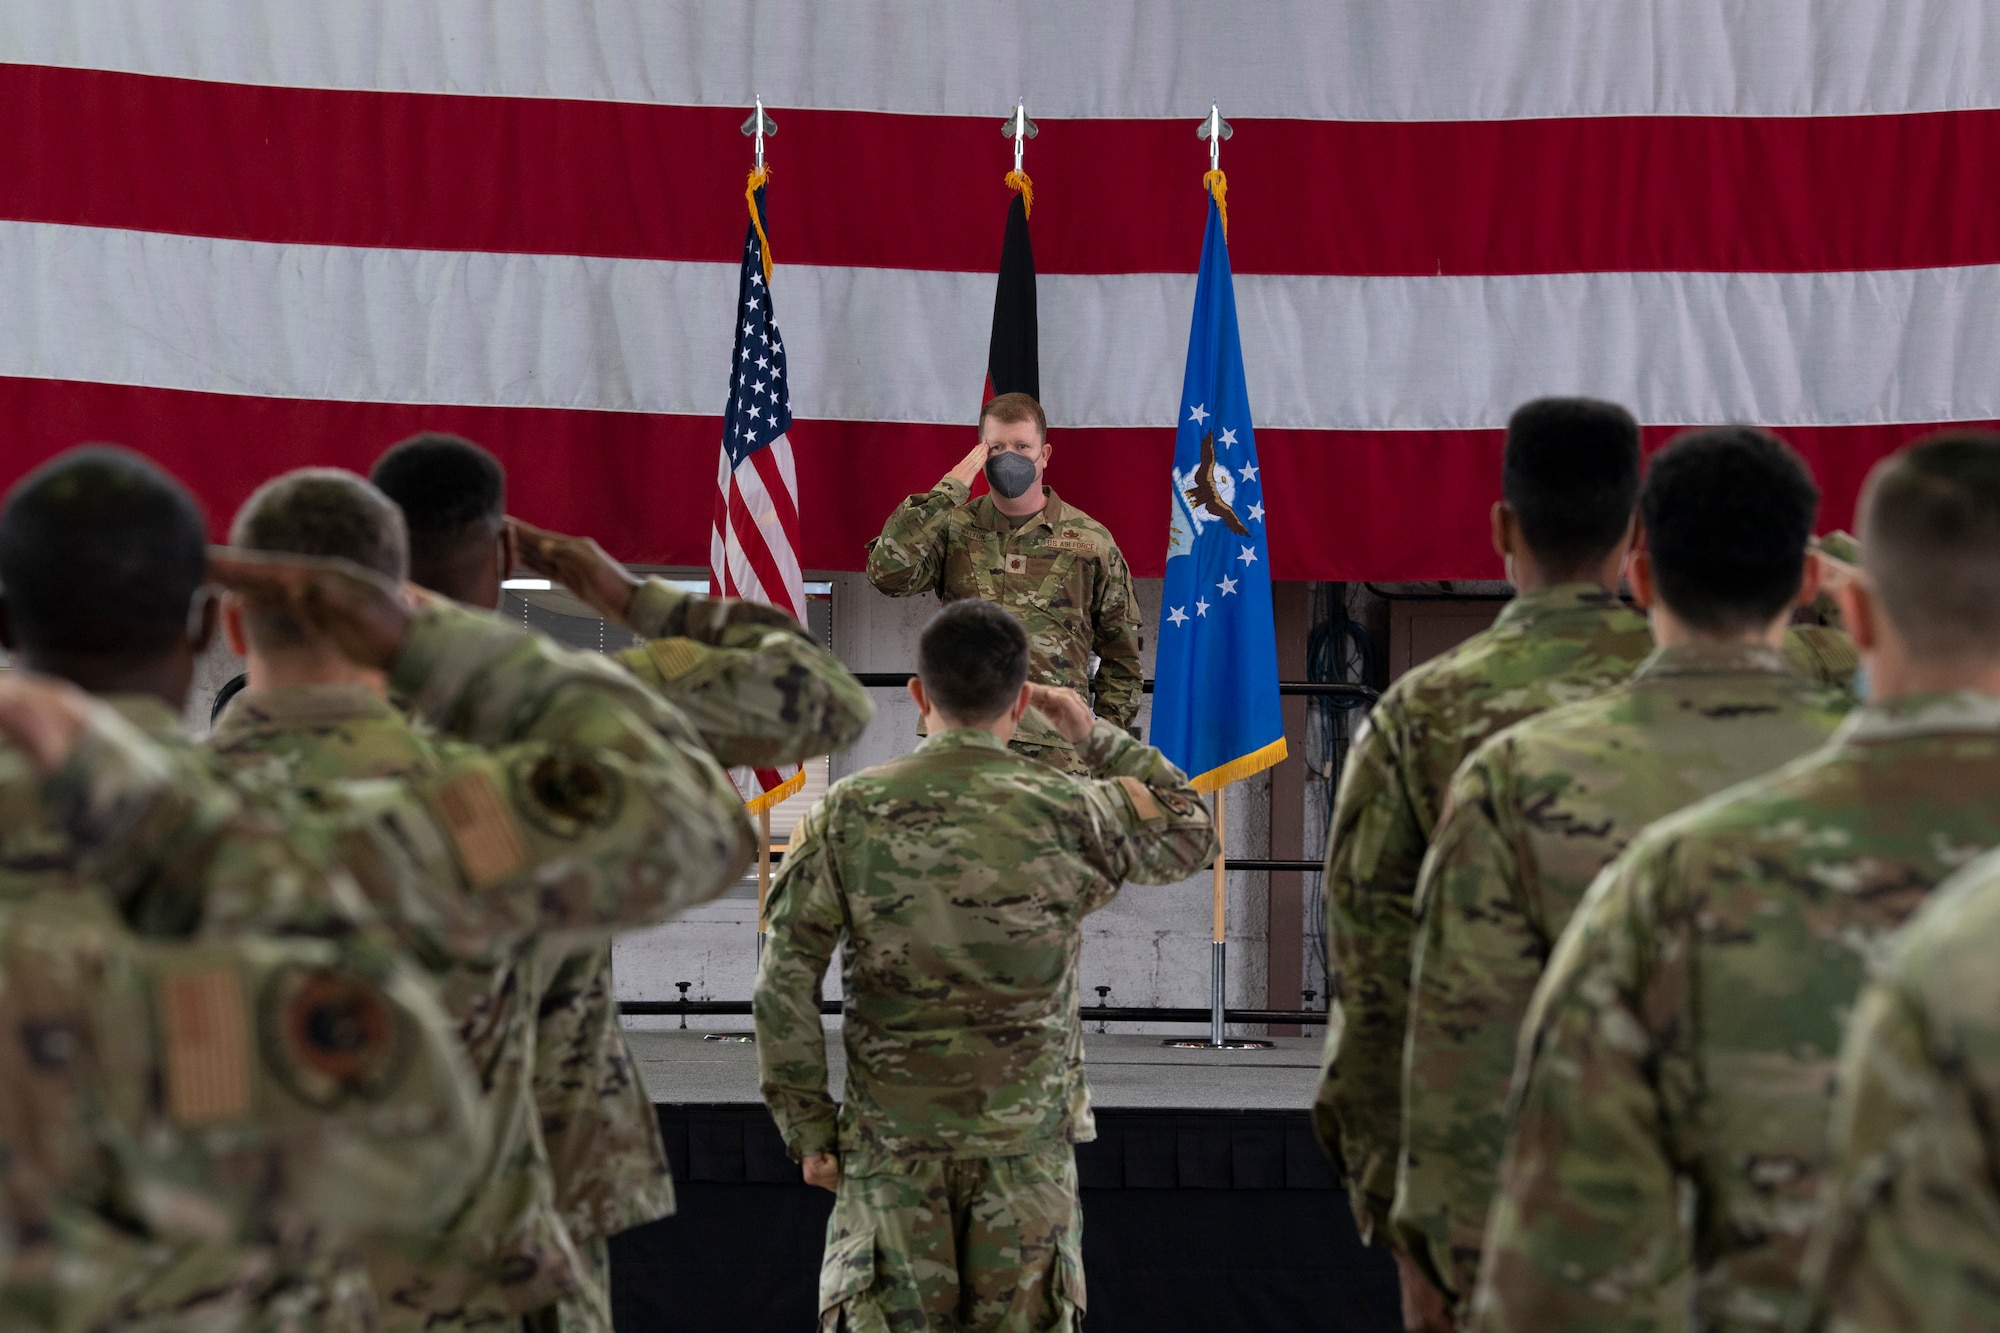 U.S. Air Force Maj. Kevin Walton, 52nd Maintenance Squadron commander, returns his first salute to U.S. Air Force Airmen from the 52nd MXS after assuming command of the squadron during a ceremony July 9, 2021, on Spangdahlem Air Base, Germany.